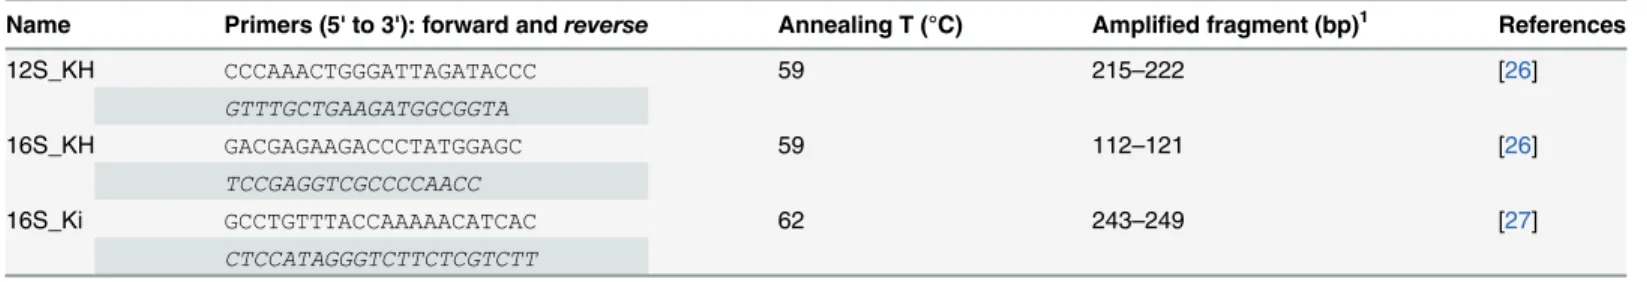 Table 2. Primer pairs used for DNA amplification [26, 27].